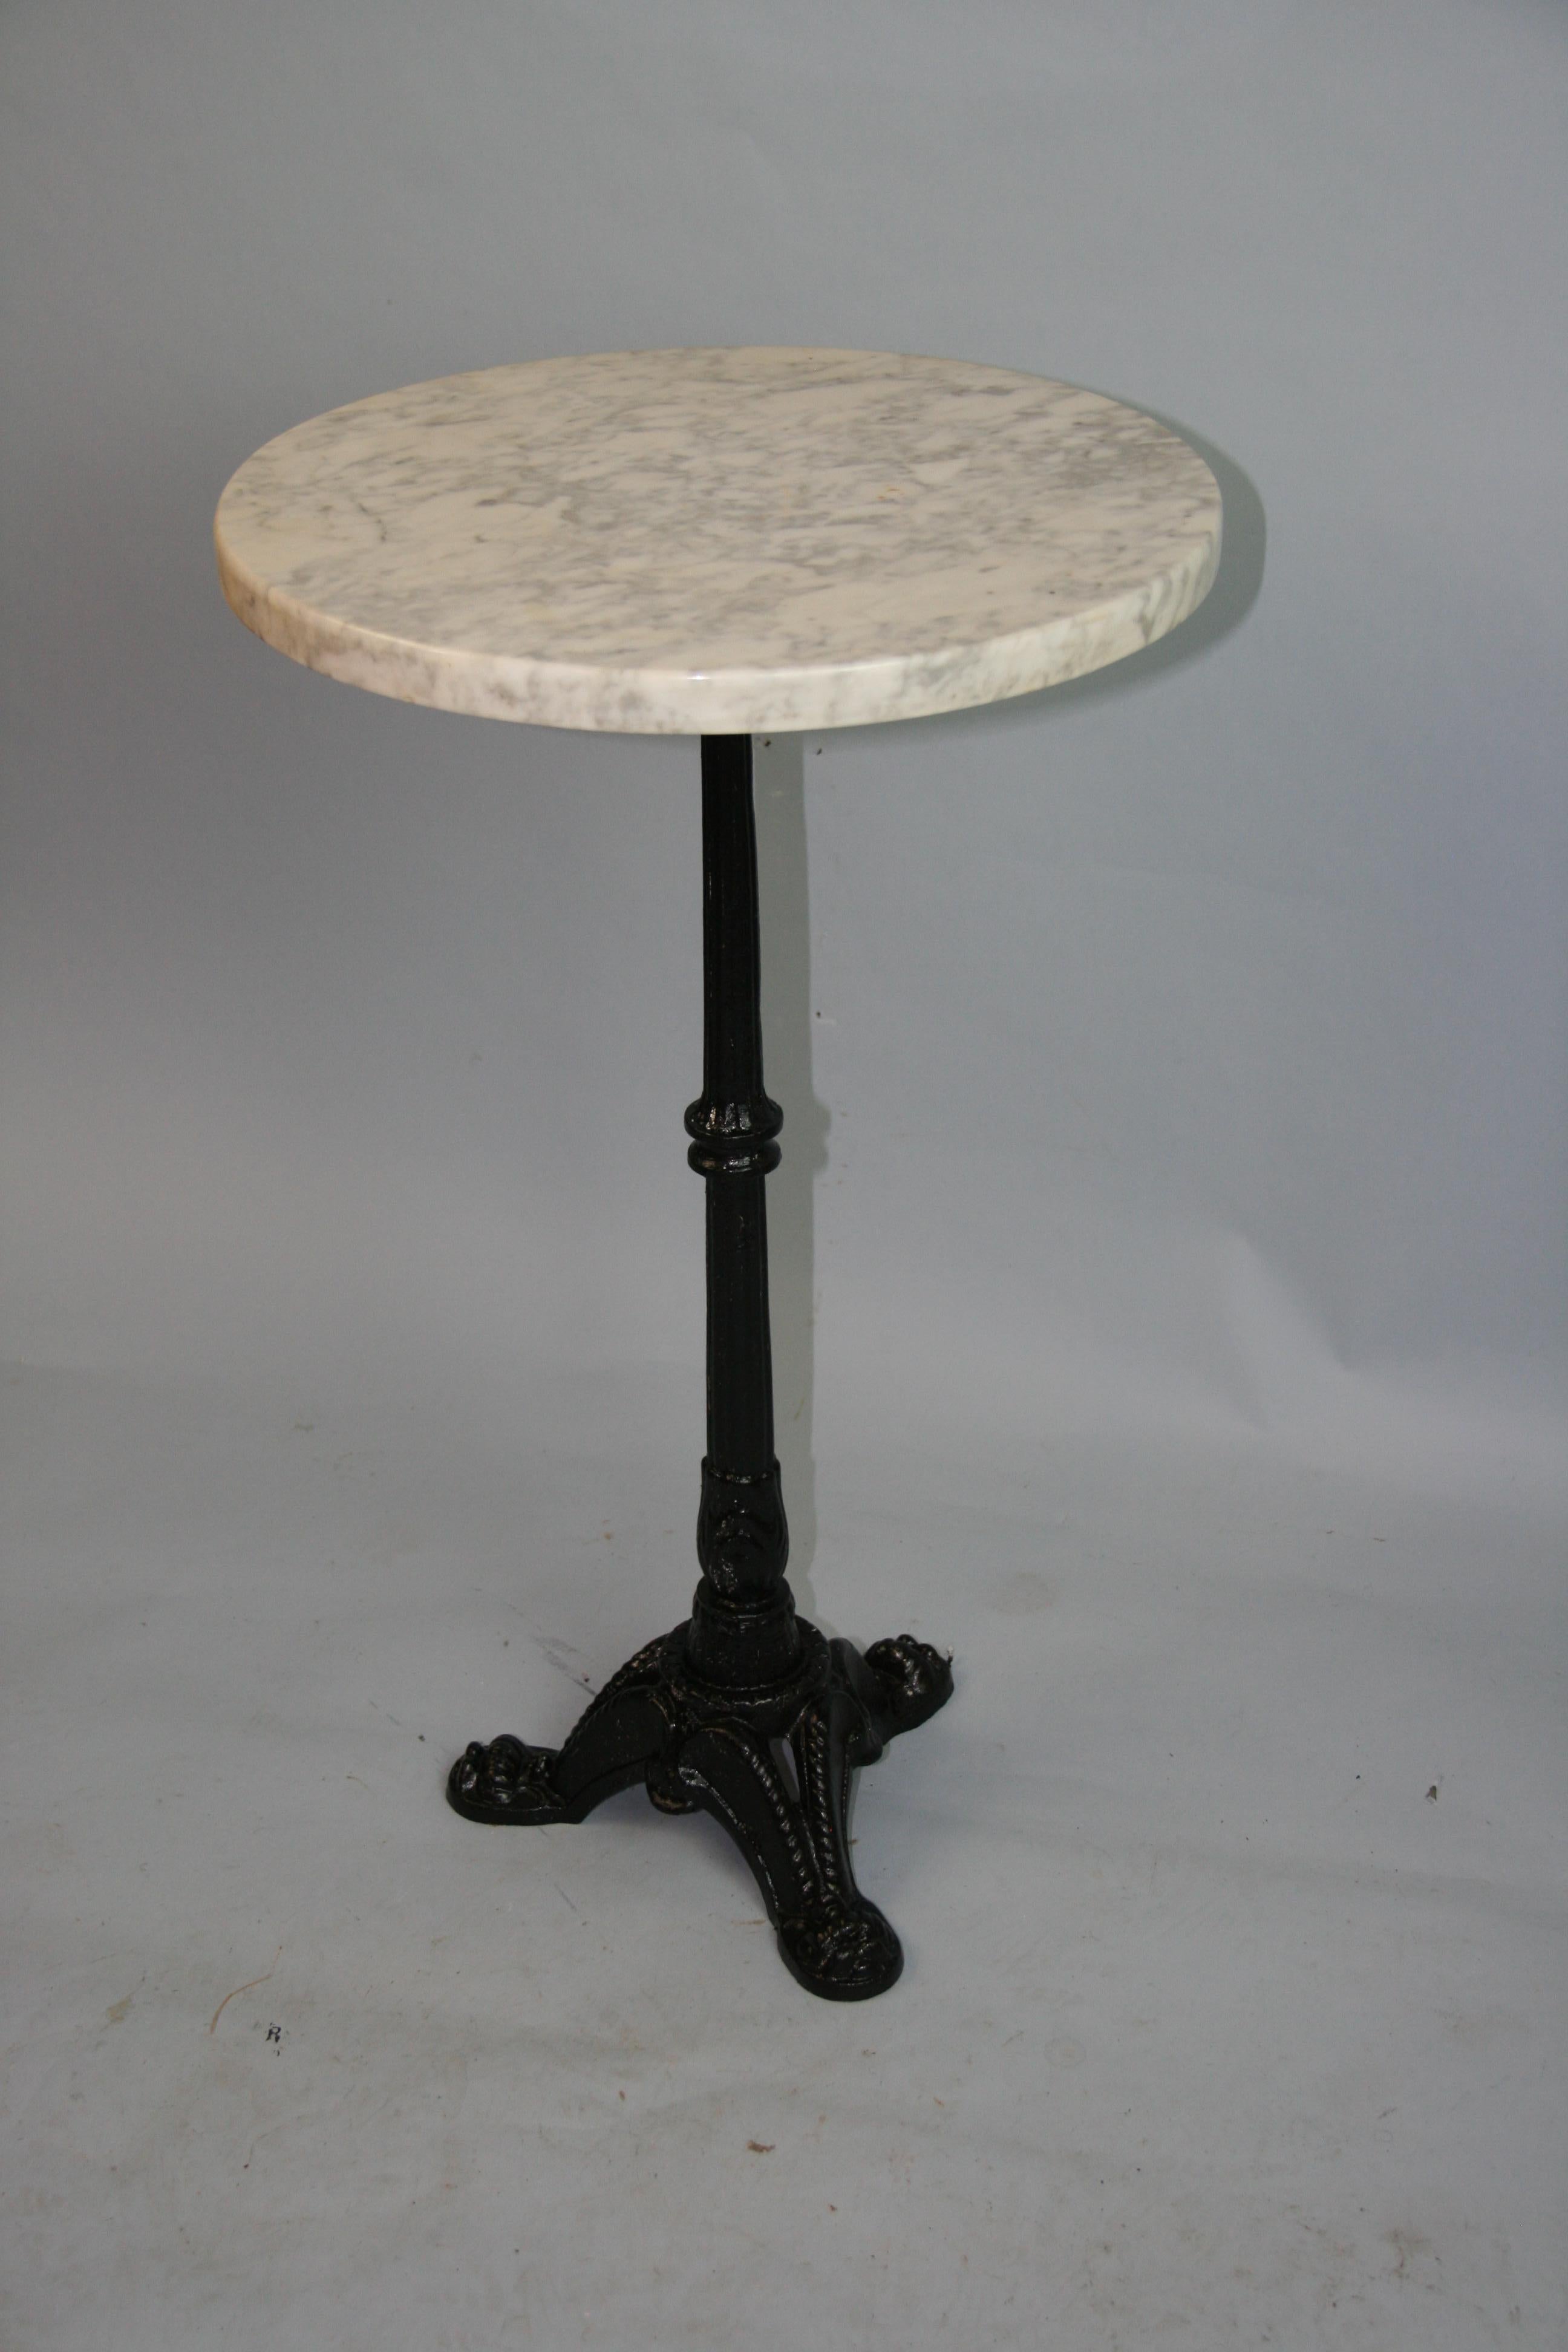 1293 This elegant antique round table was crafted in the south of France circa 1920.
The end table sits on three curved legs ending with paw feet under a tapered and fluted pedestal stem. Marble top is white and grey.